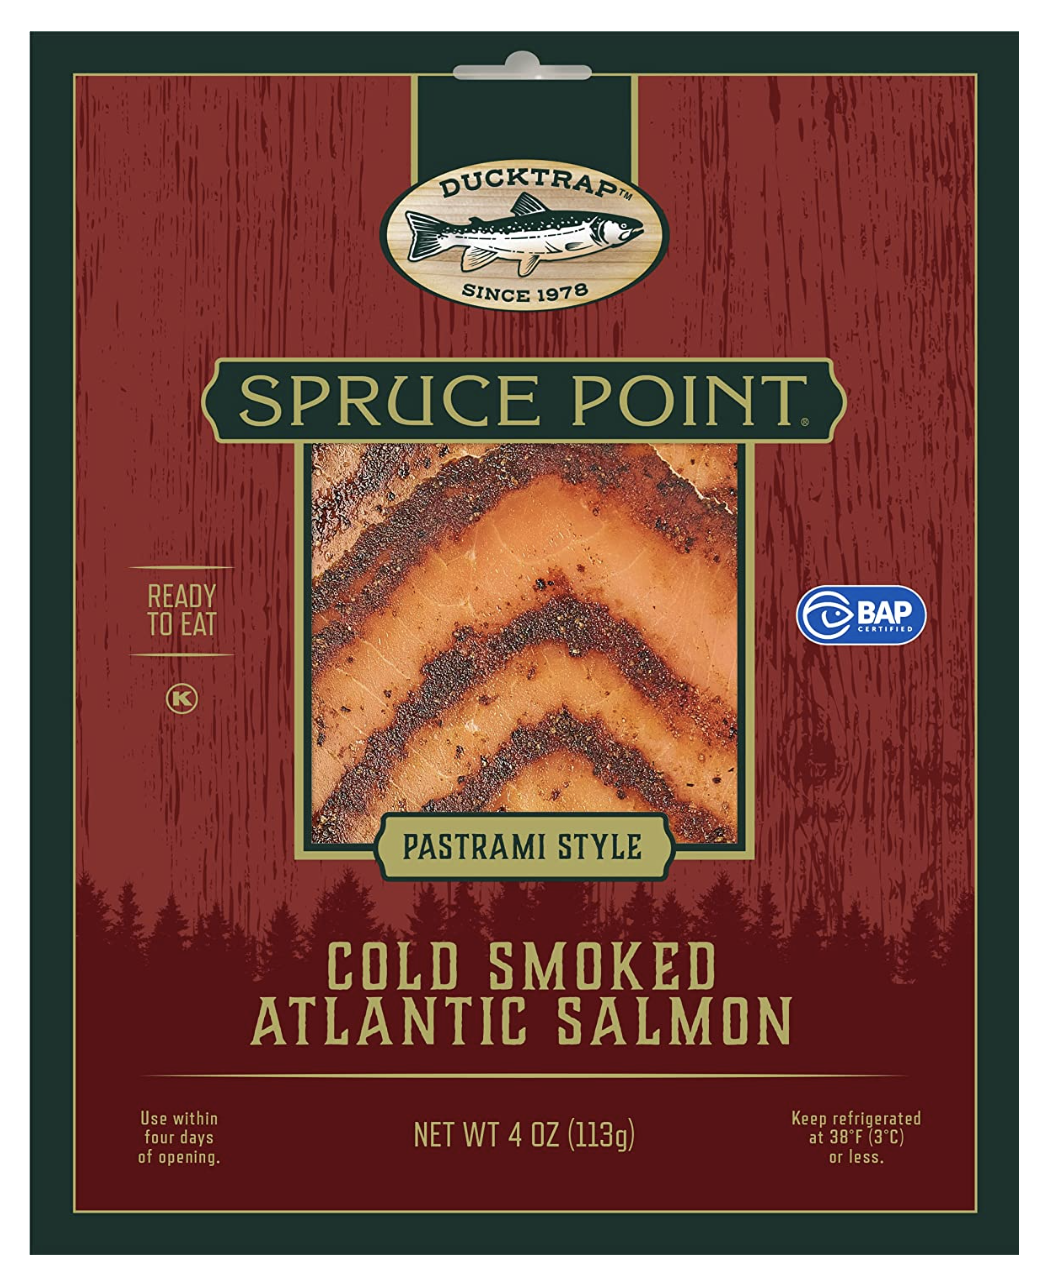 Ducktrap River of Maine Spruce Point Cold Smoked Atlantic Salmon Pastrami Style - 4 oz